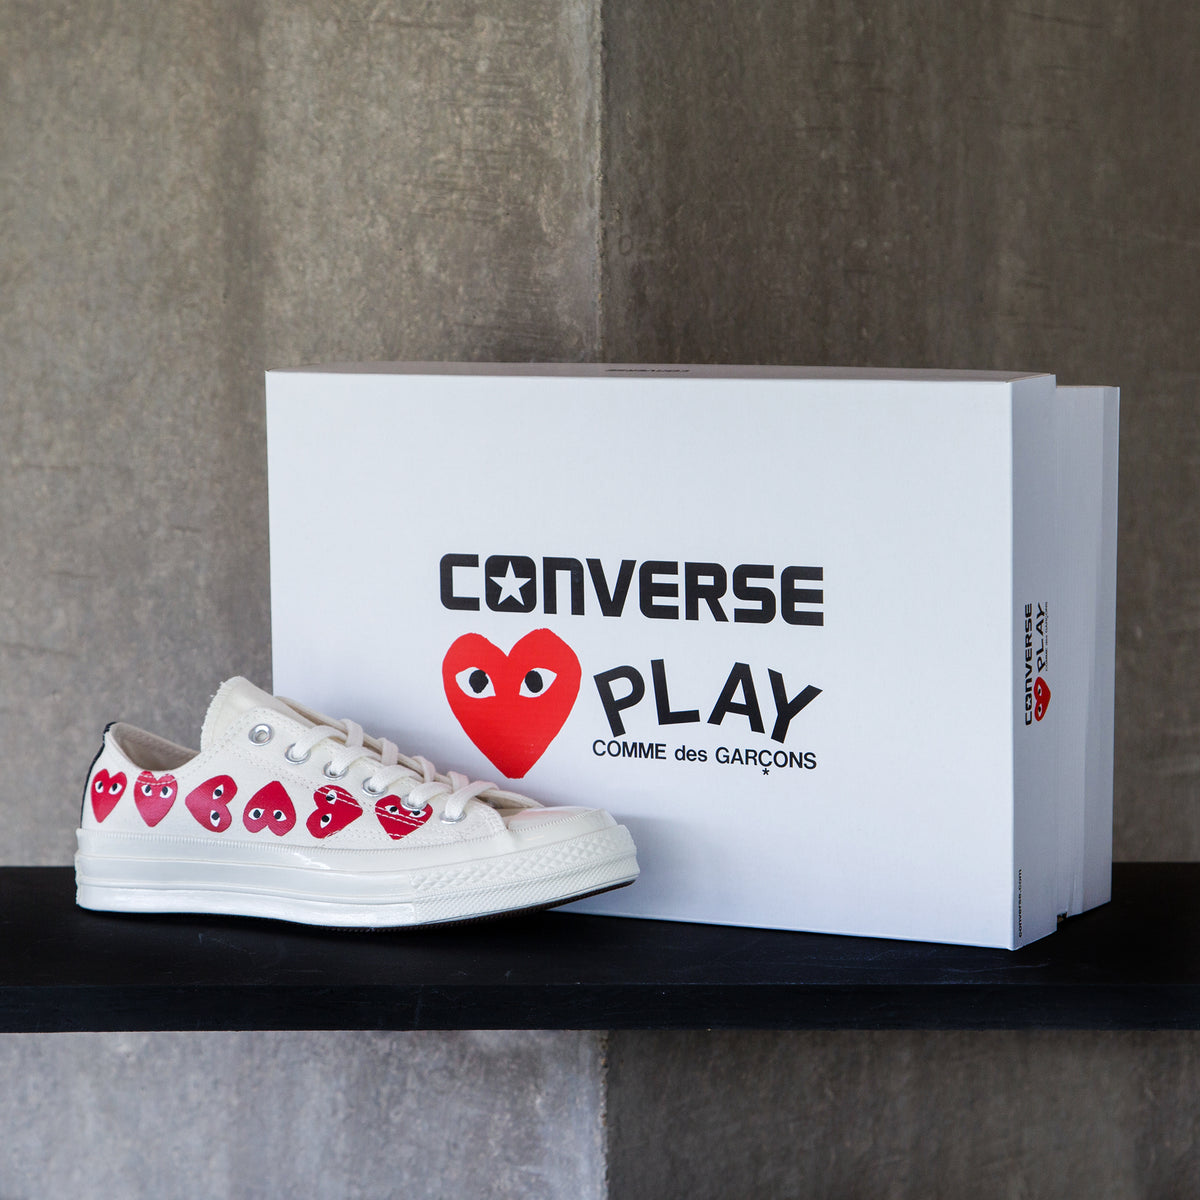 cdg converse off white